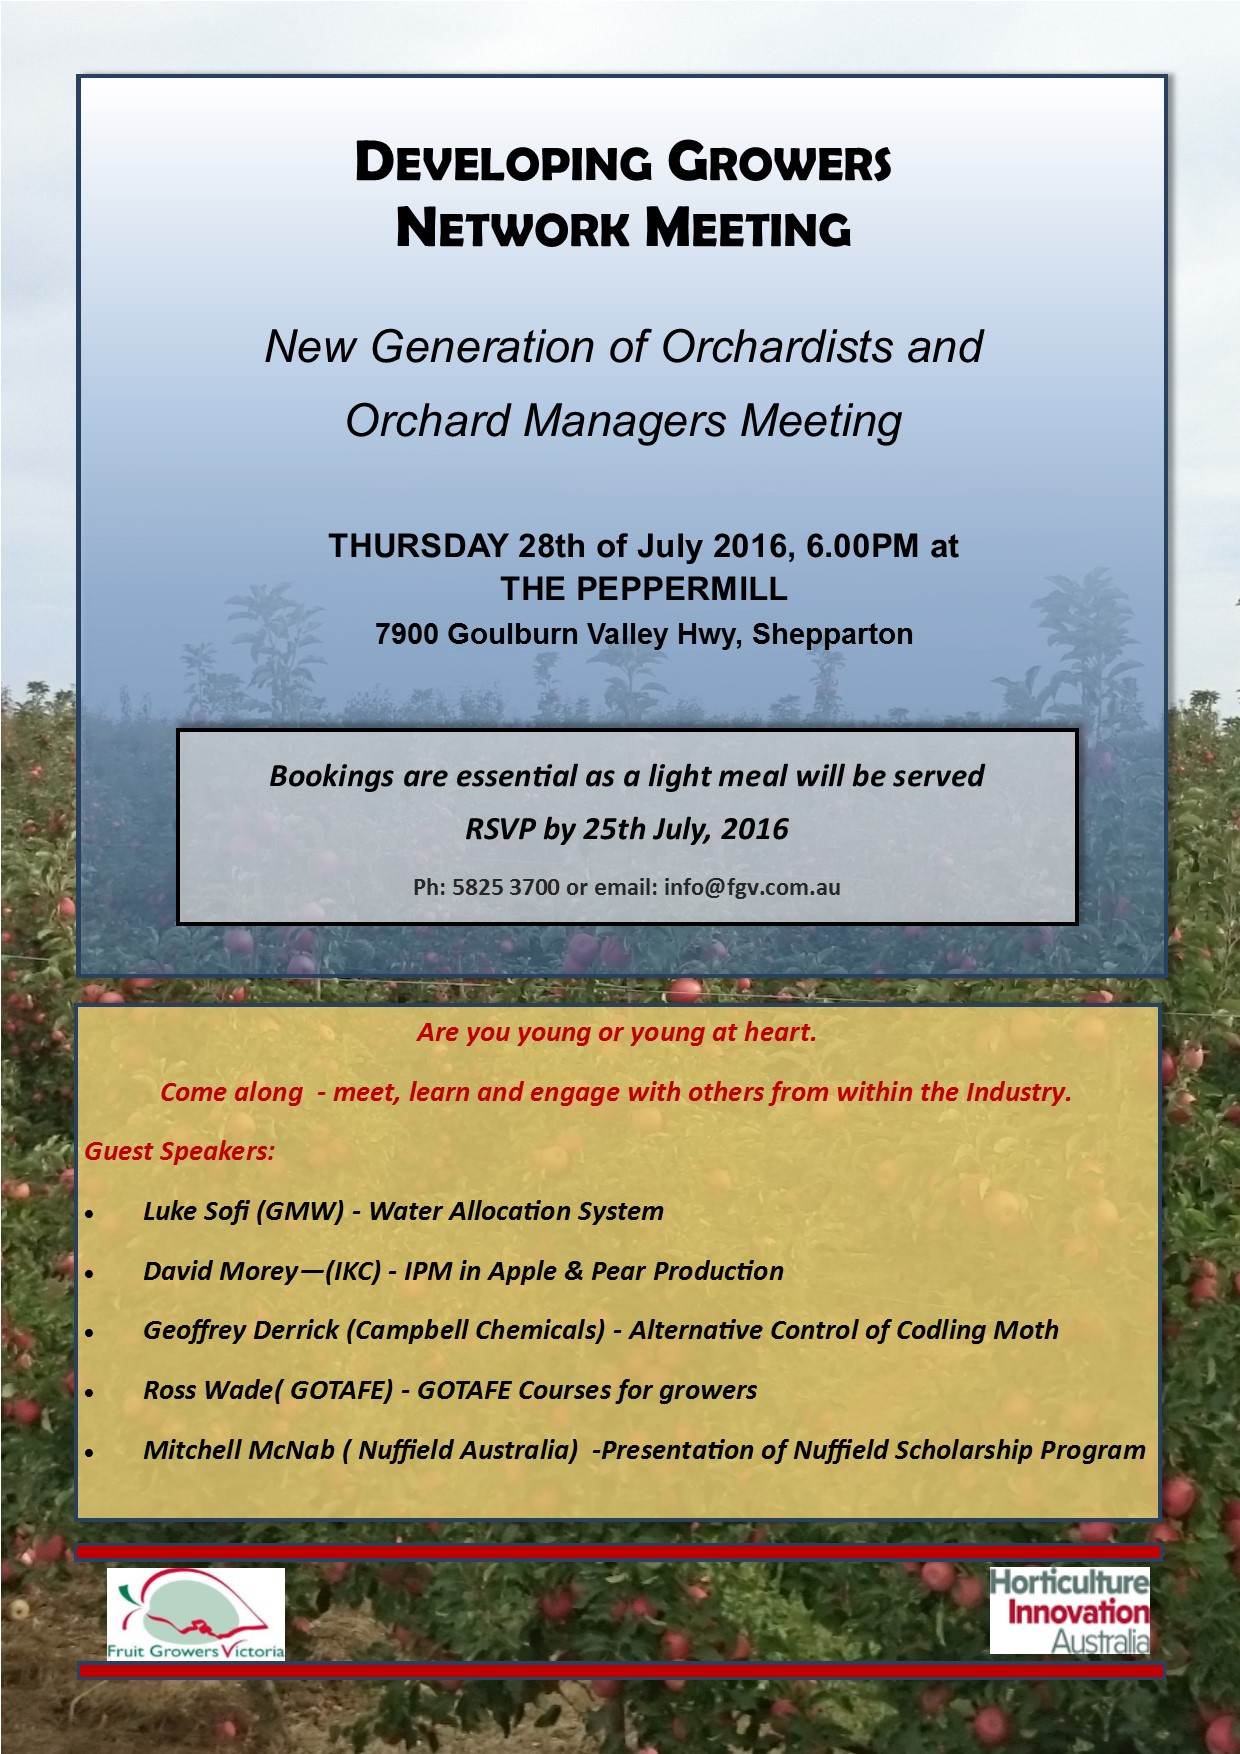 DEVELOPING GROWERS  NETWORK MEETING -  New Generation of Orchardists and  Orchard Managers Meeting